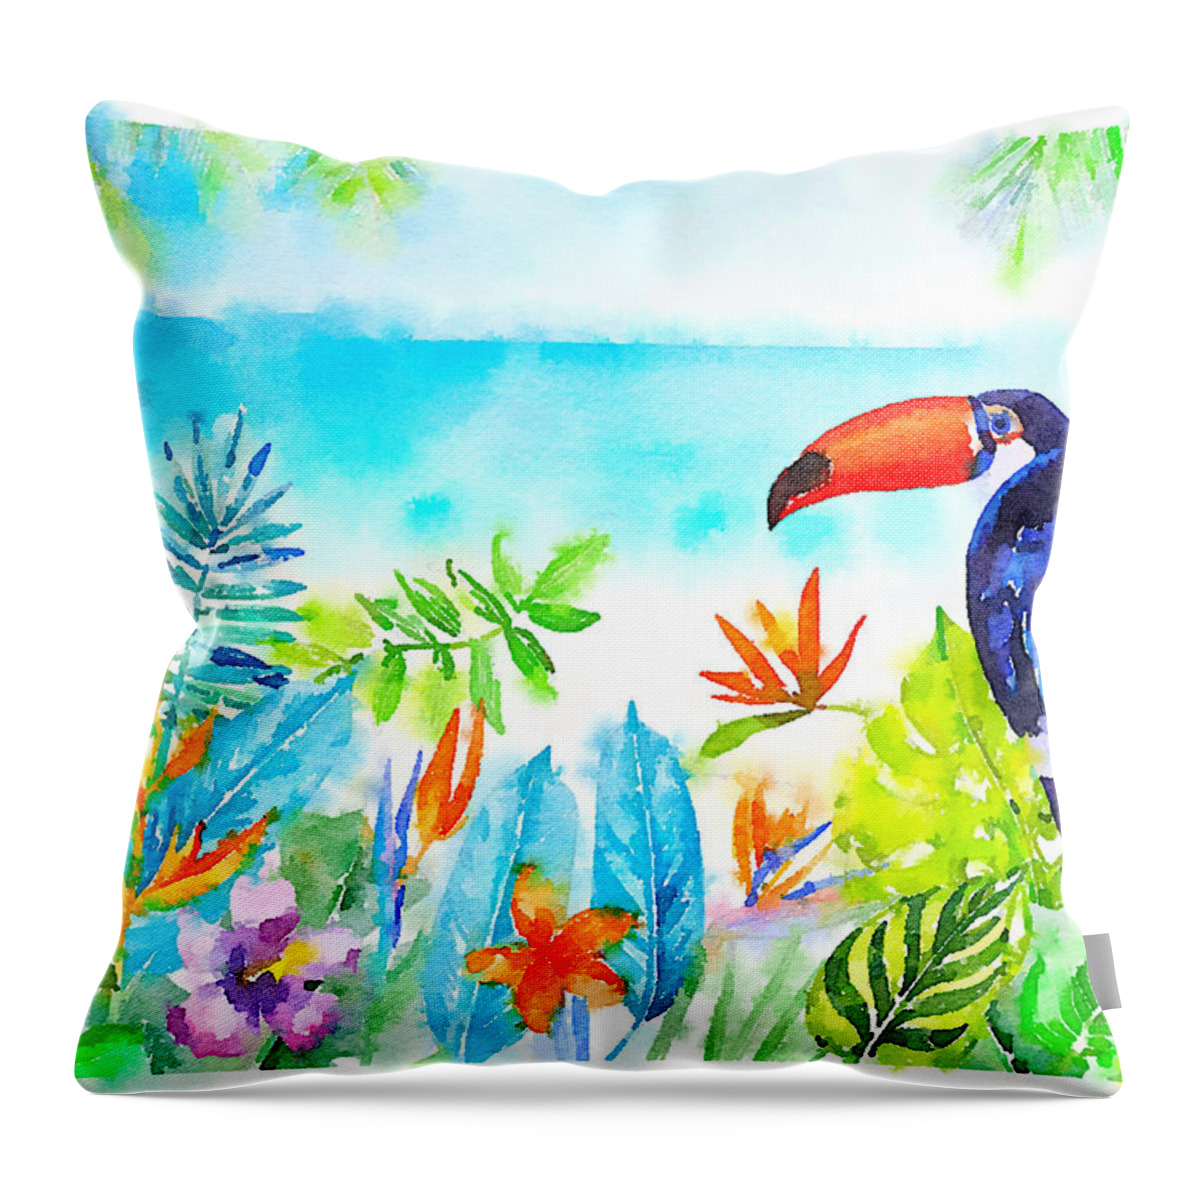 Topical Island Throw Pillow featuring the painting Tropical island - original watercolor by Vart by Vart